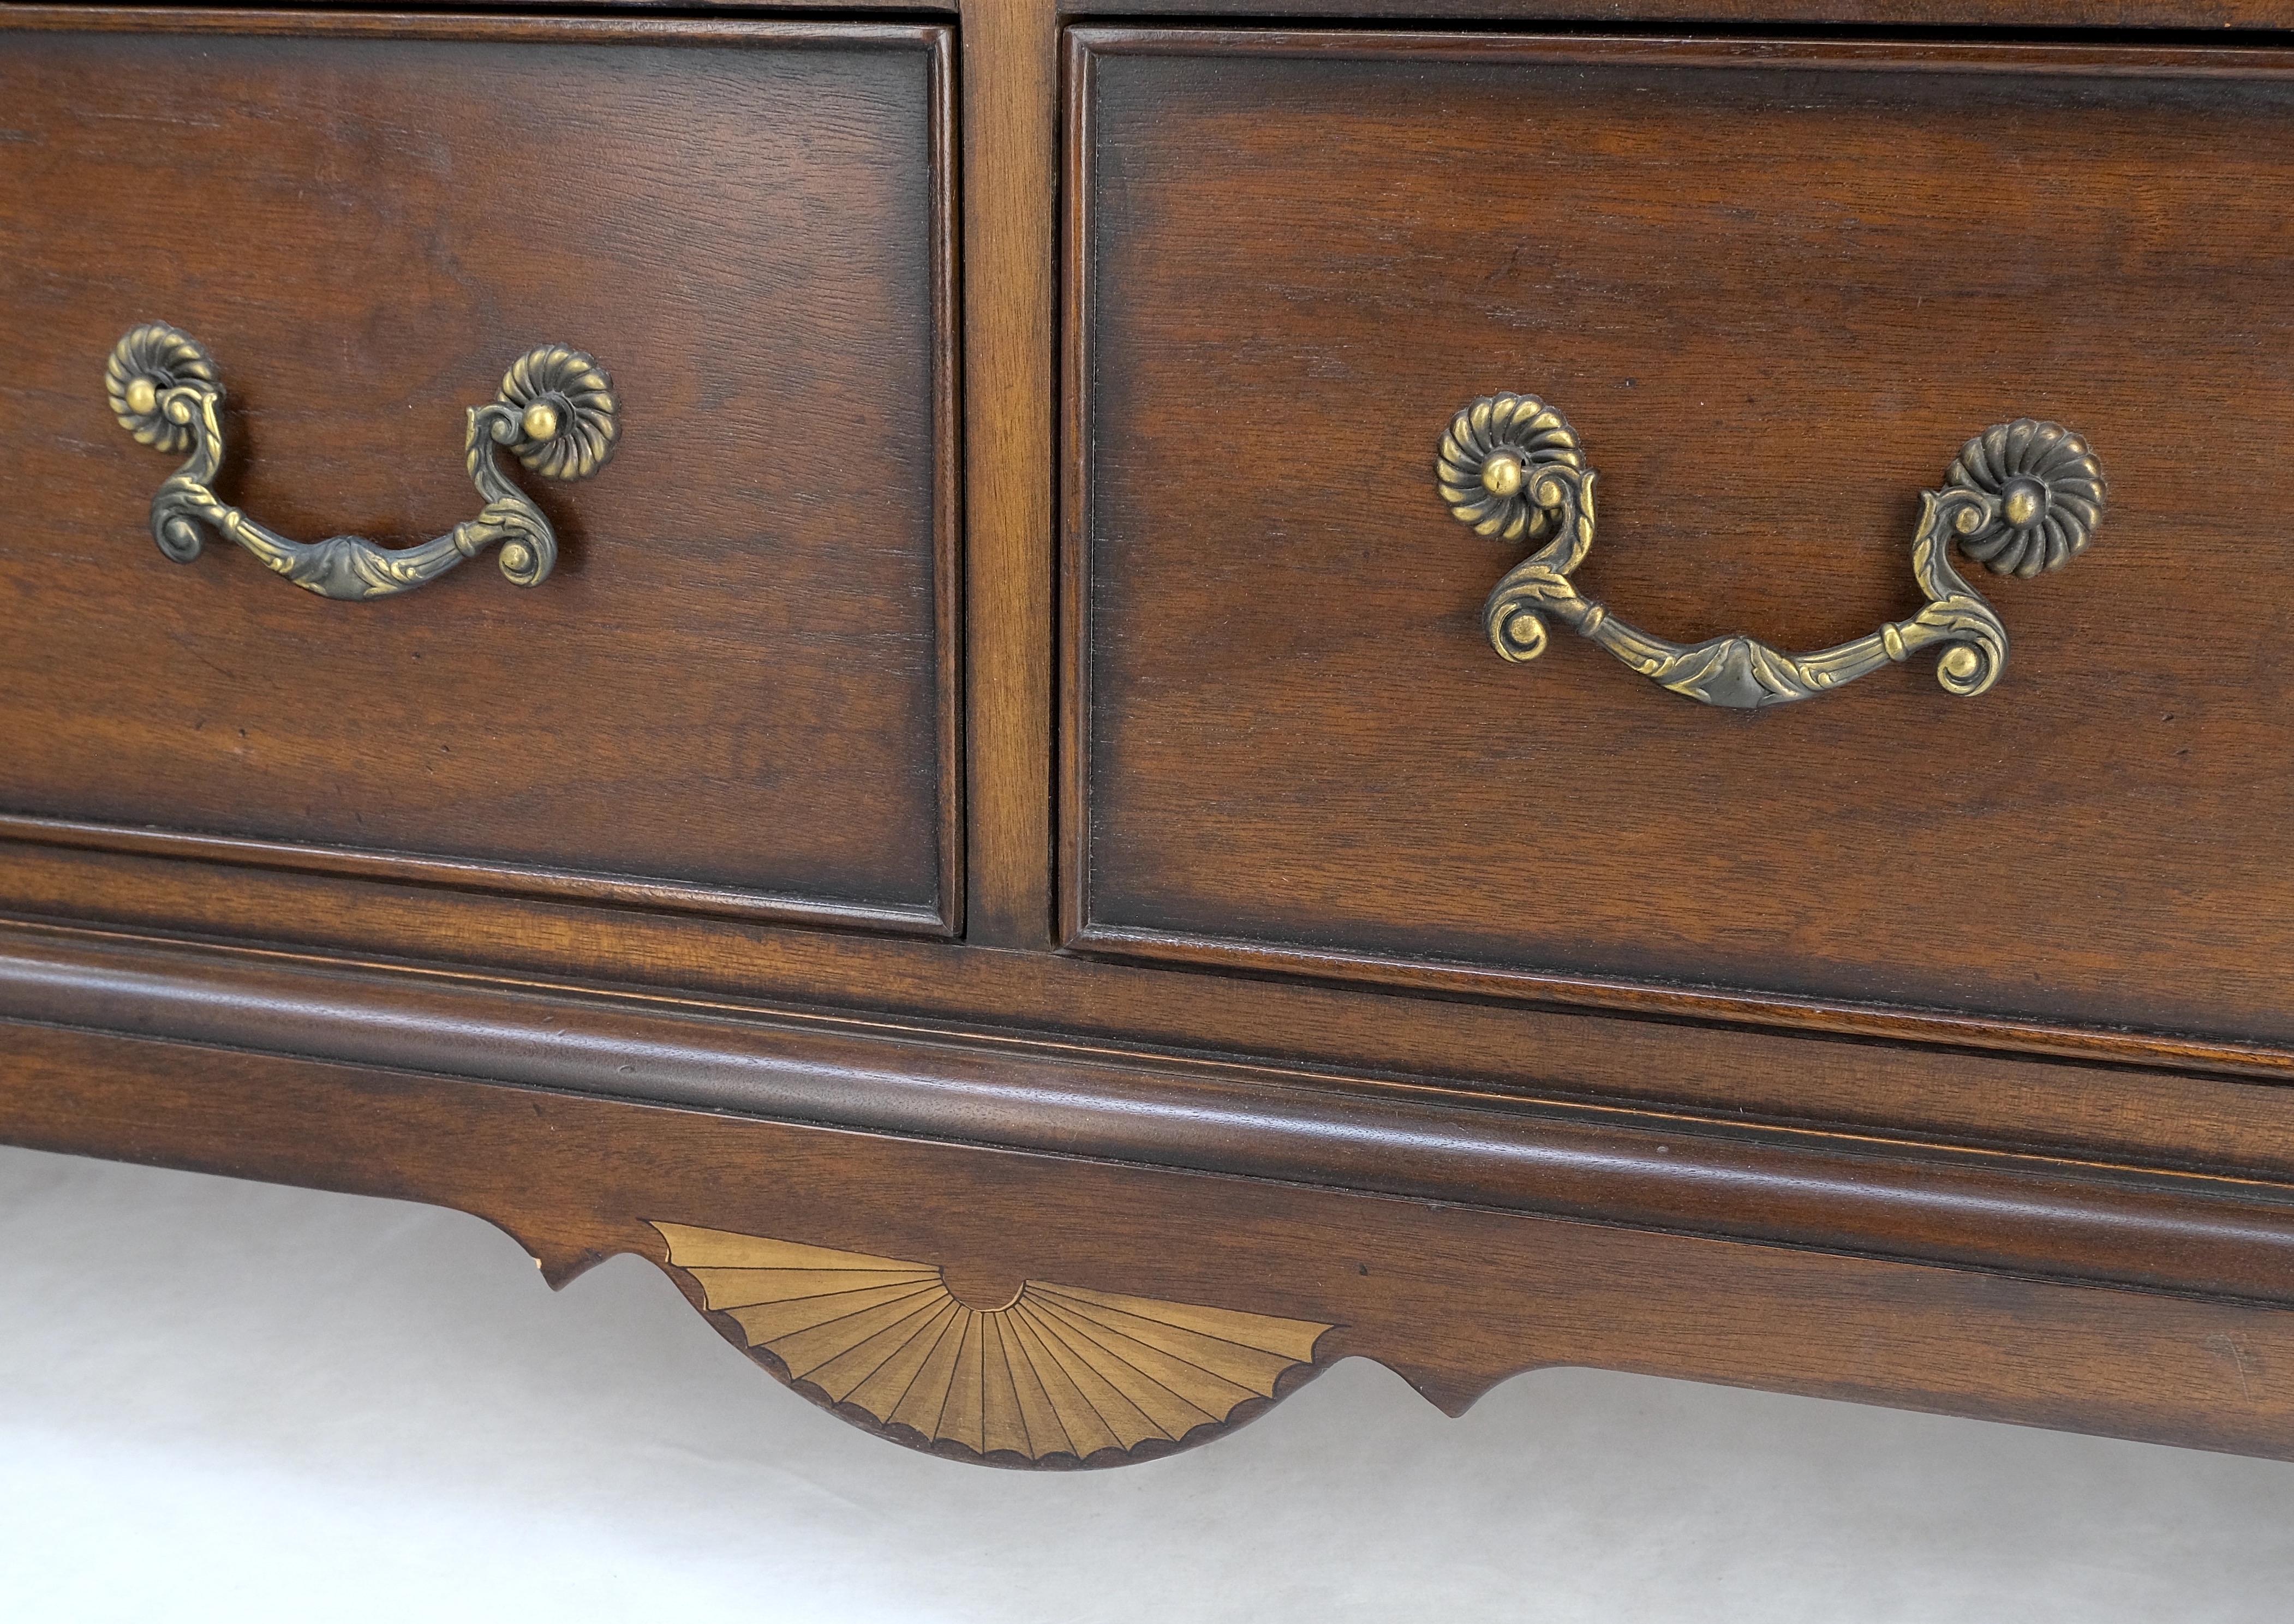 20th Century Banded Top Mahogany Inlayed Bracket Feet 11 Drawers Dresser Credenza MINT! For Sale